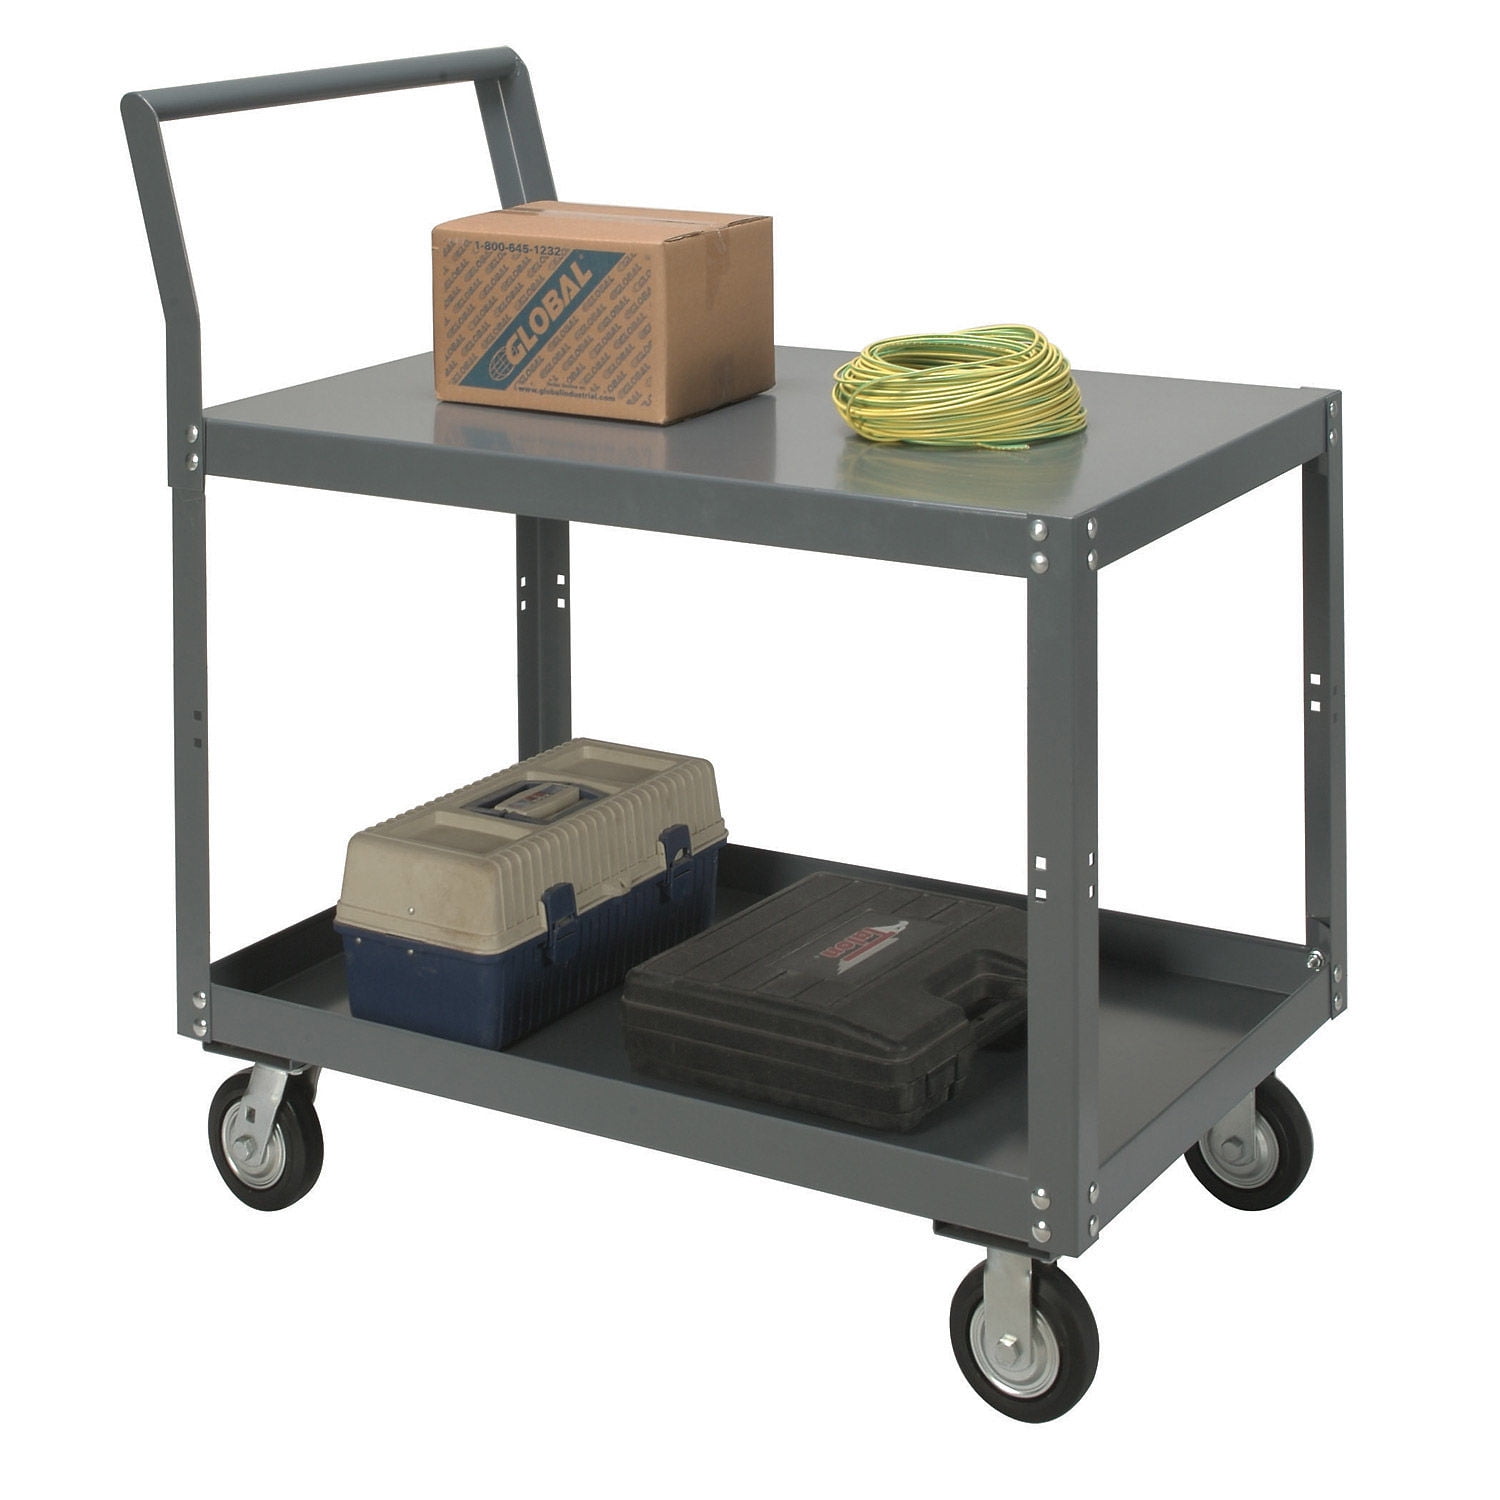 330 lbs Capacity Details about   Oshion Heavy-Duty 3-Shelf Rolling Service/Utility/Push Cart 